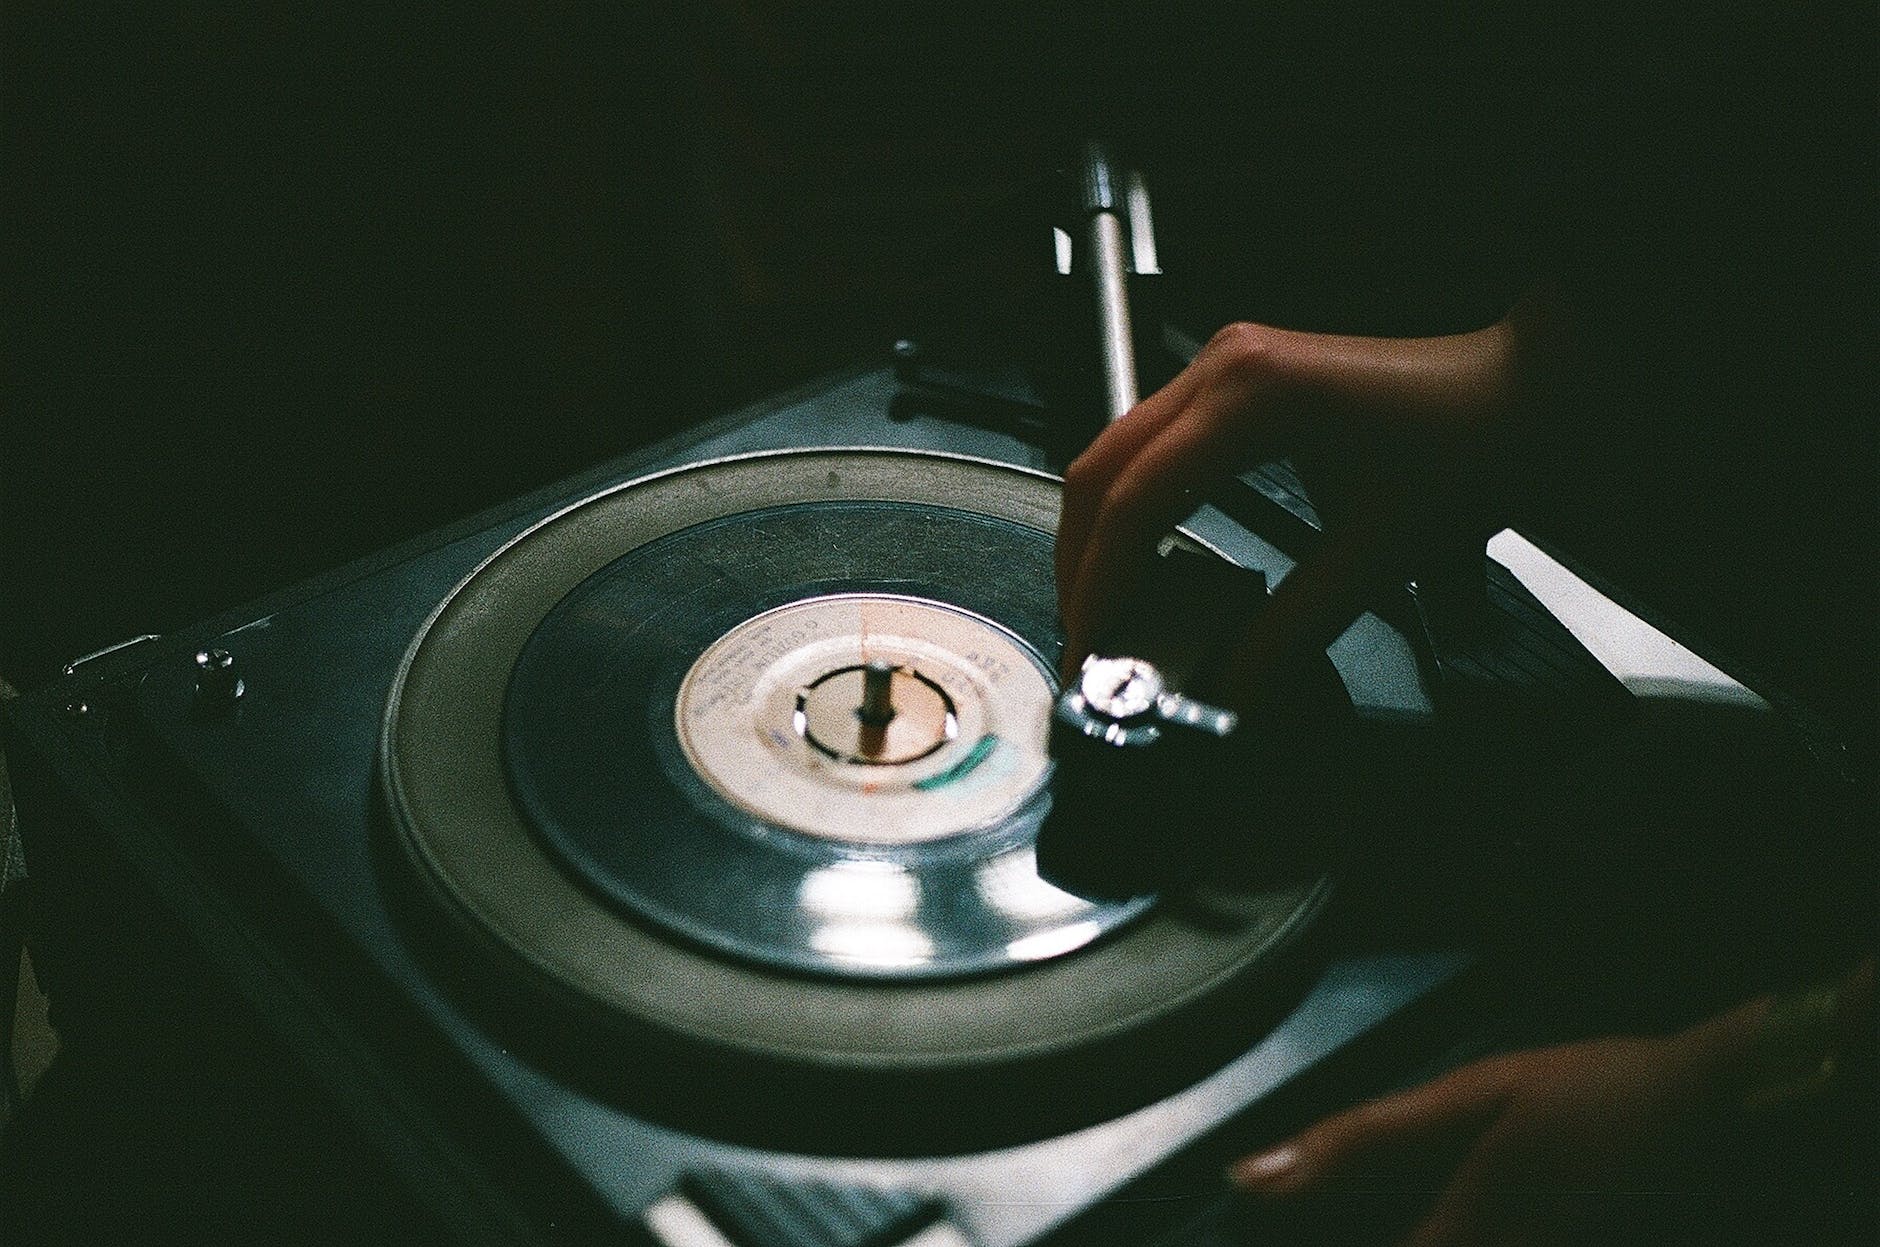 close up photo of vinyl record player